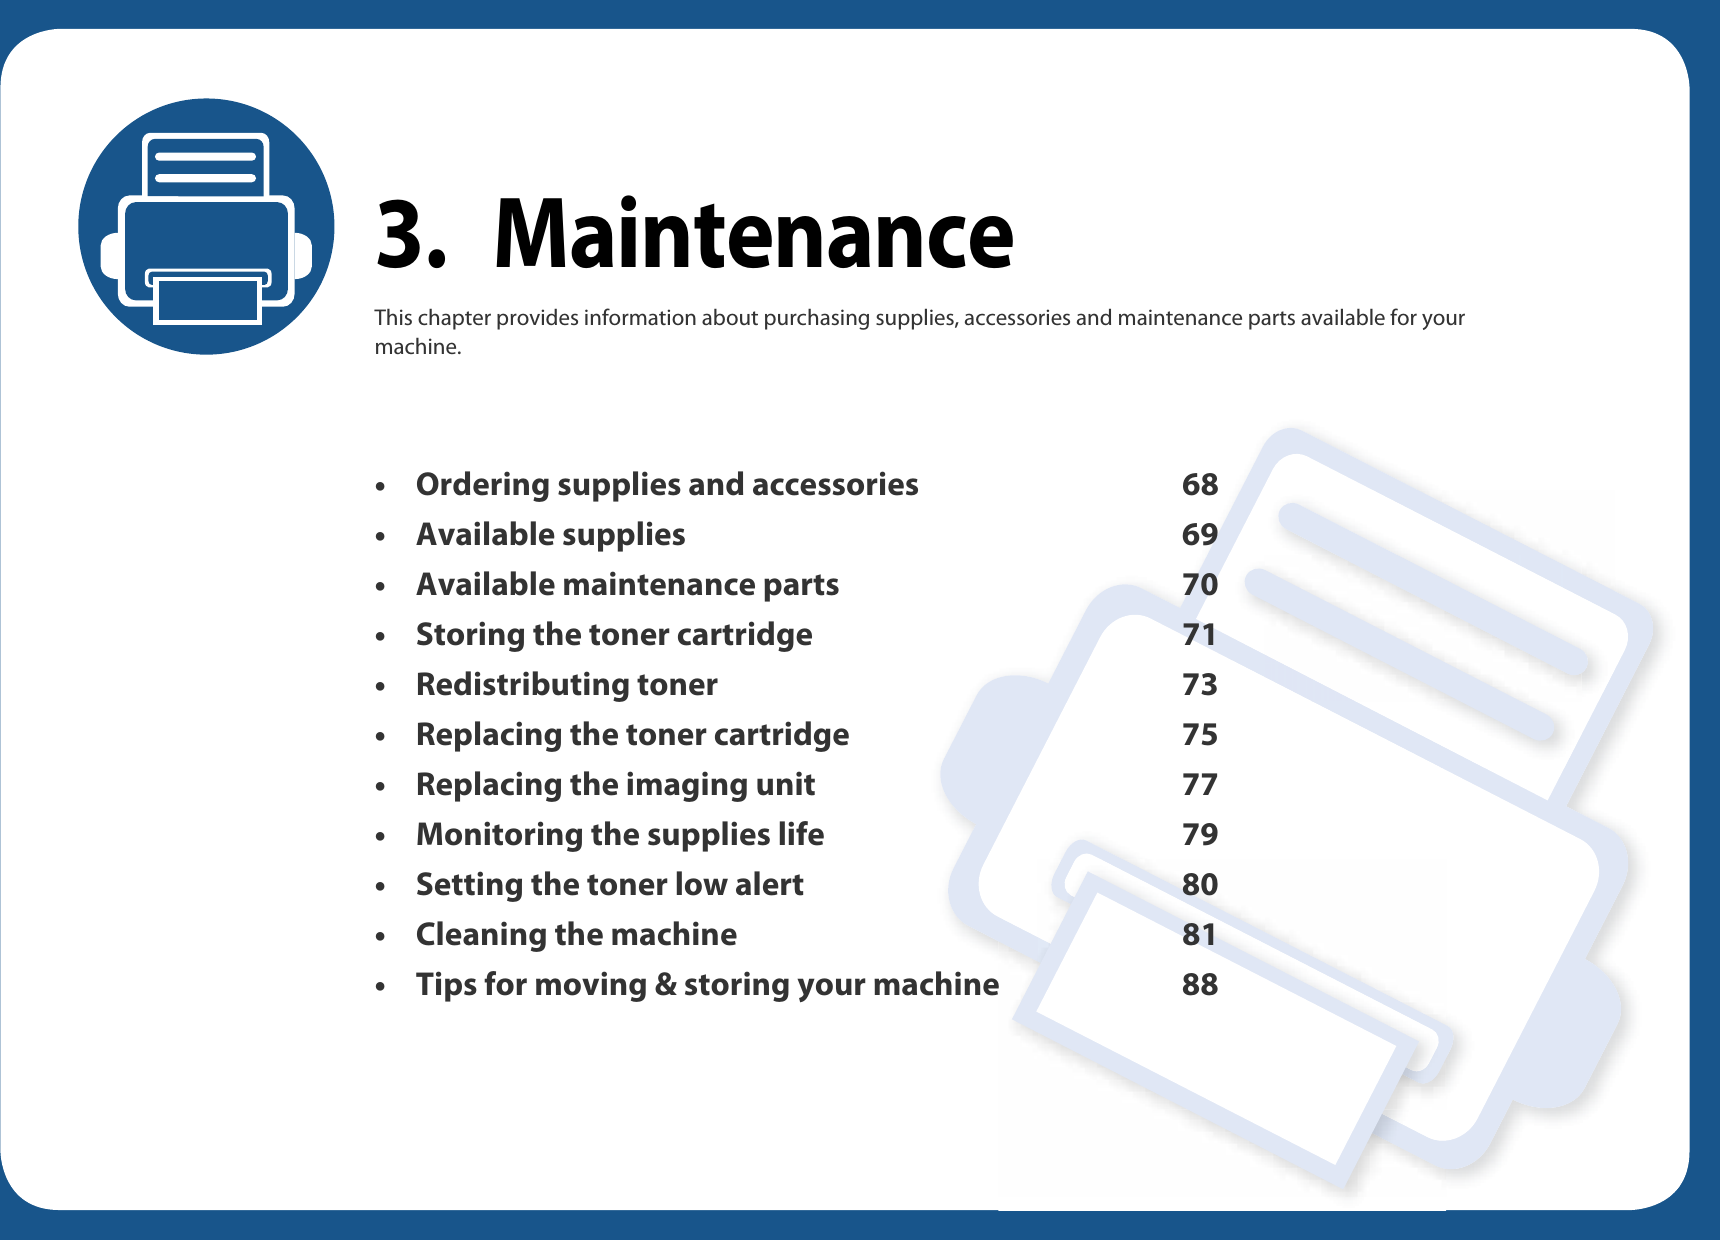 3. MaintenanceThis chapter provides information about purchasing supplies, accessories and maintenance parts available for your machine.• Ordering supplies and accessories 68• Available supplies 69• Available maintenance parts 70• Storing the toner cartridge 71• Redistributing toner 73• Replacing the toner cartridge 75• Replacing the imaging unit 77• Monitoring the supplies life 79• Setting the toner low alert 80• Cleaning the machine 81• Tips for moving &amp; storing your machine 88